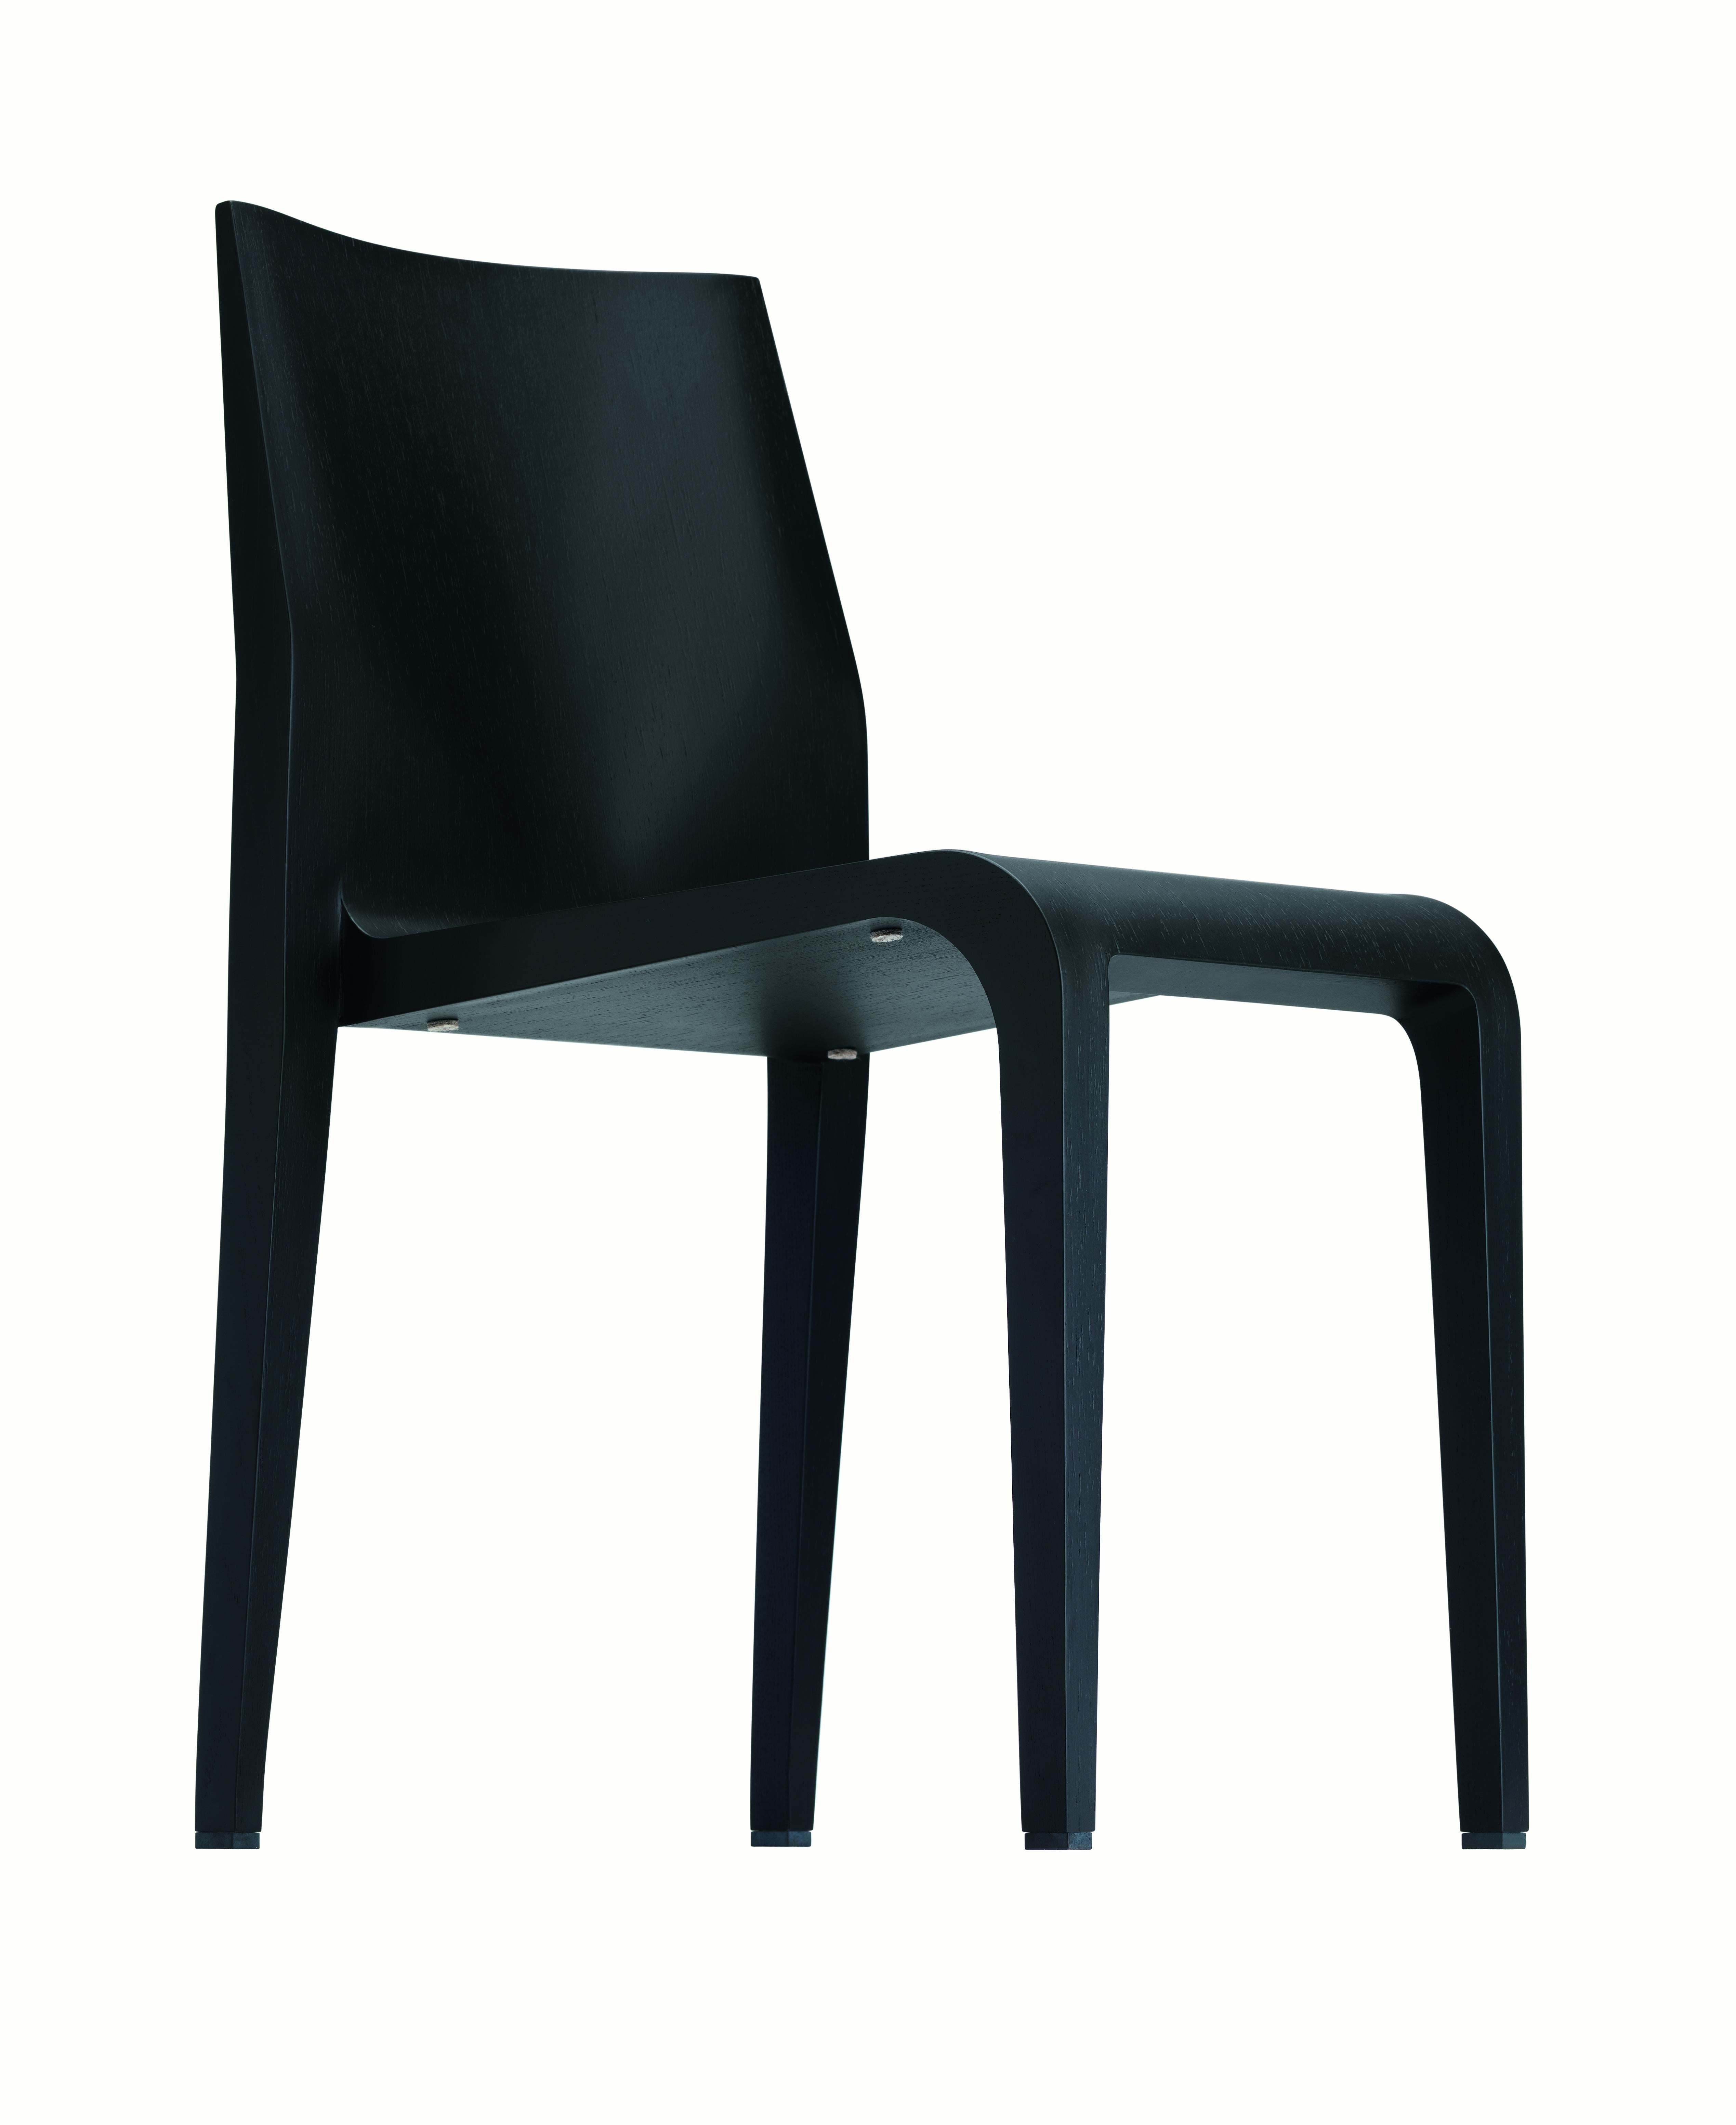 Alias 301 Laleggera Chair in Black Color Stained Wood by Riccardo Blumer

Stacking chair with structure in solid maple or ash. Maple veneer or oak veneer. Internal support in injected polyurethane foam. Finish in transparent laquage or in colored